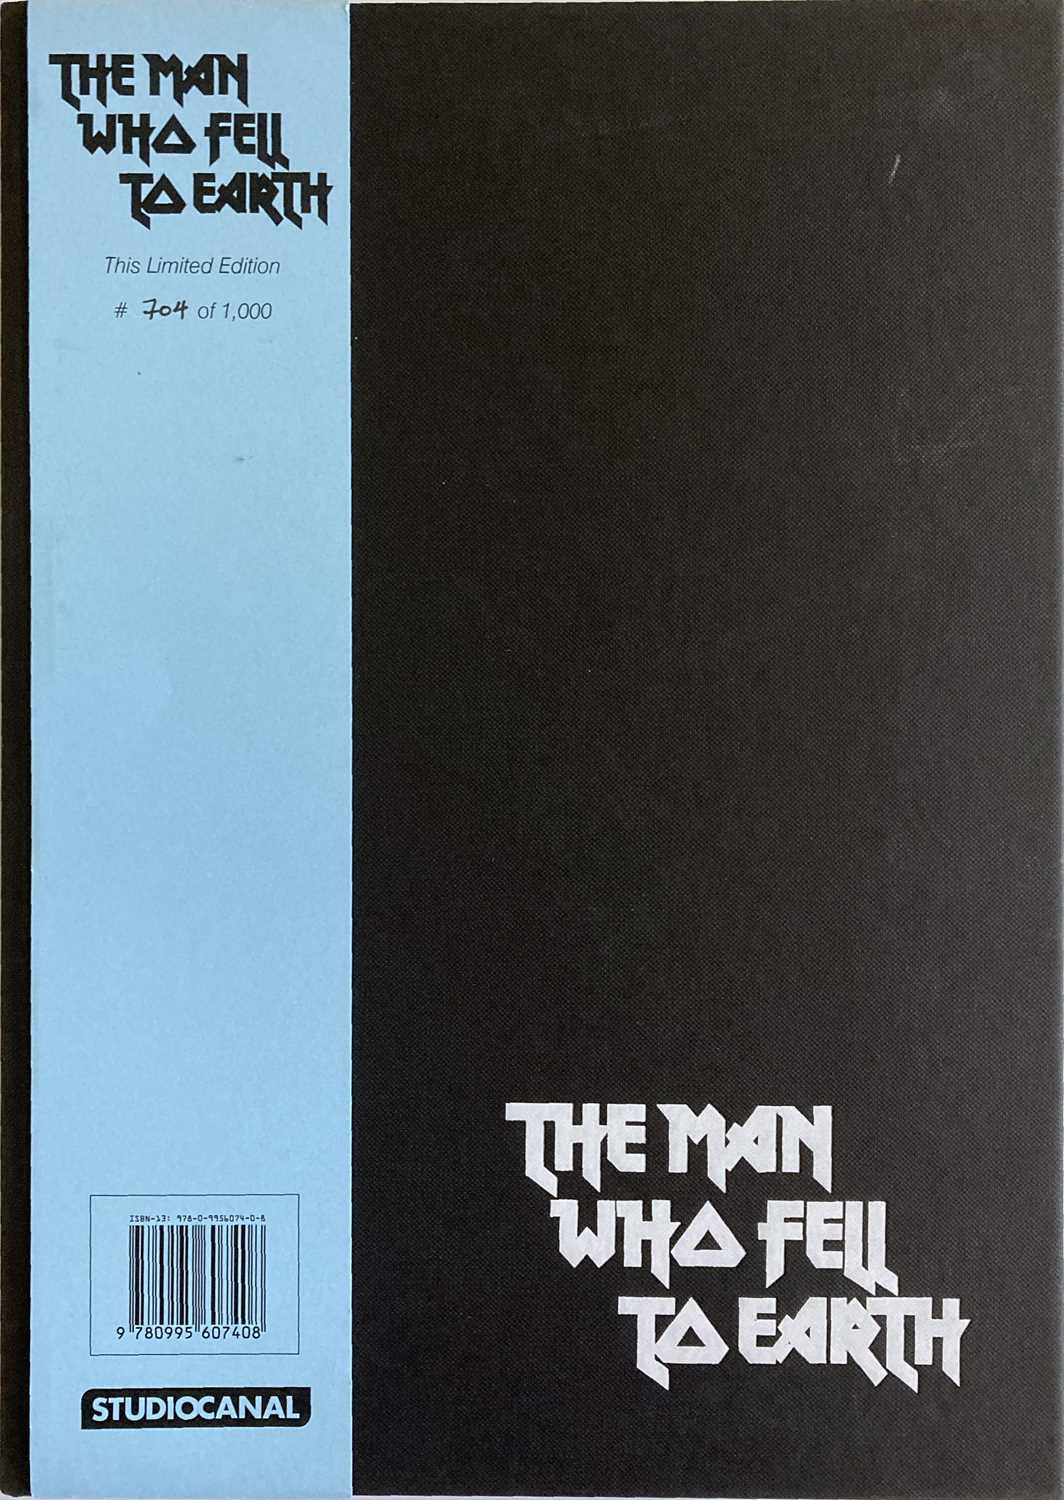 DAVID BOWIE - THE MAN WHO FELL TO EARTH STUDIO CANAL LTD EDITION BOOK.